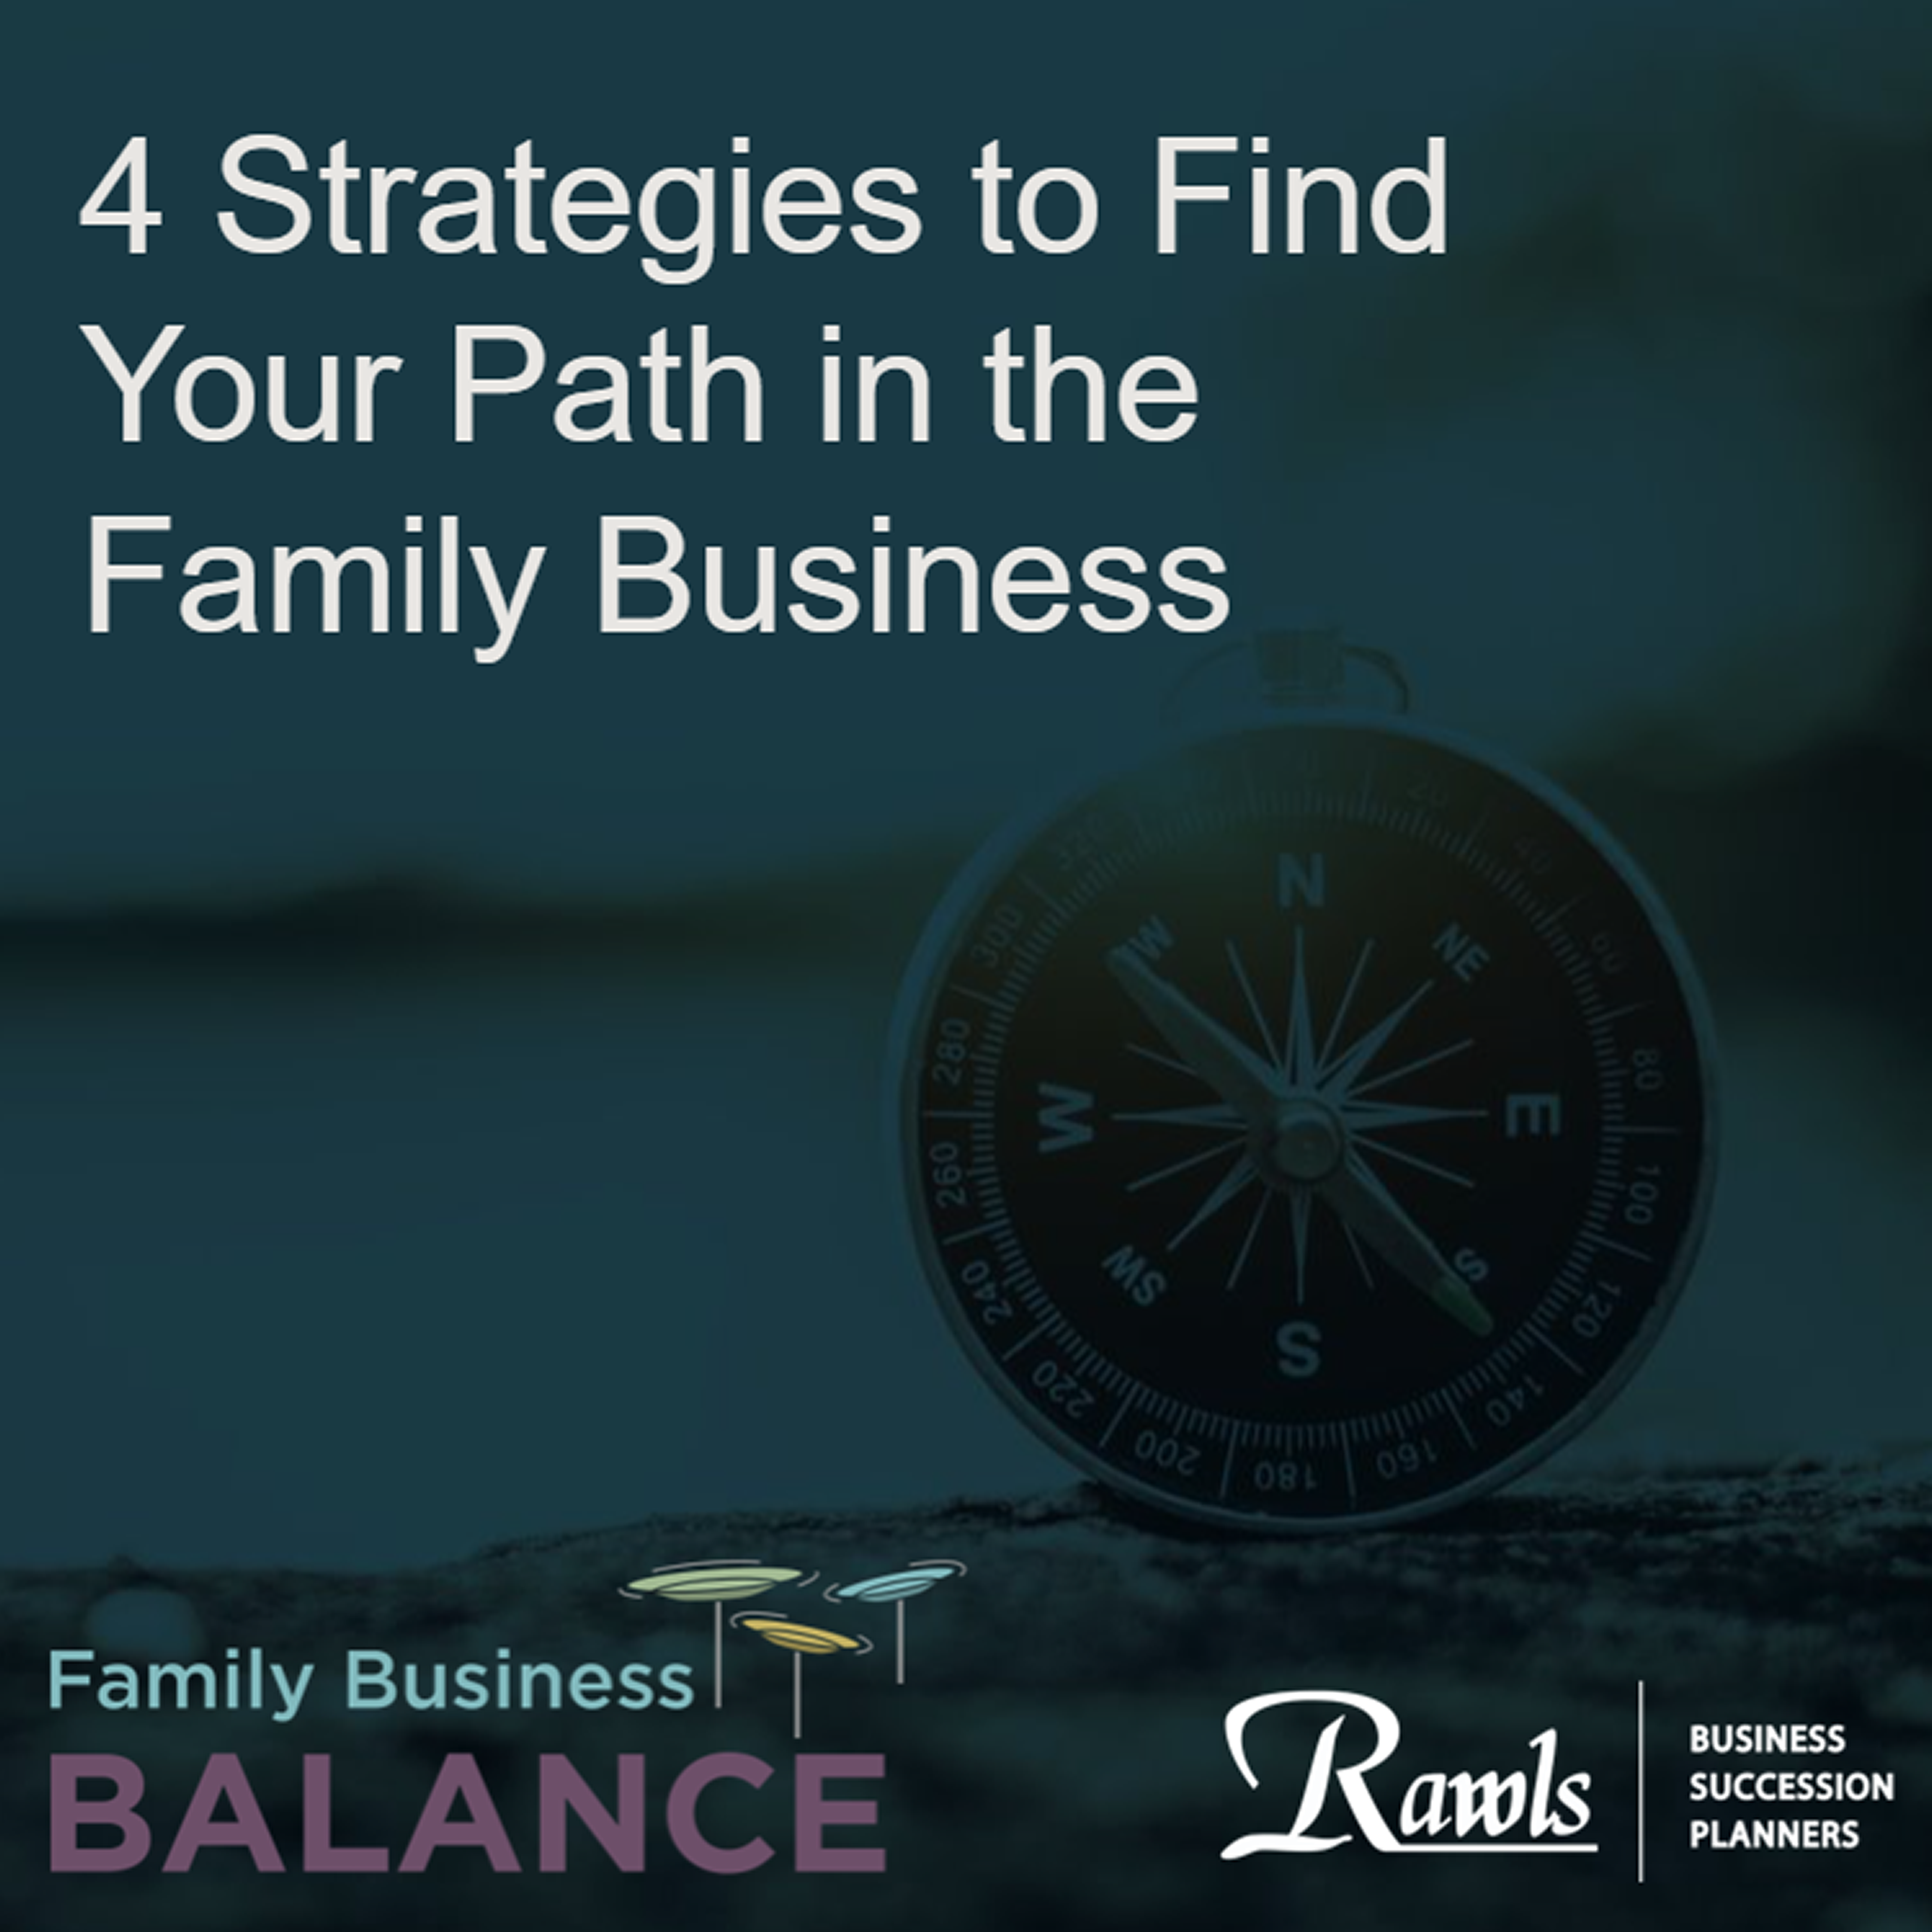 4 Strategies to Find Your Path in the Family Business